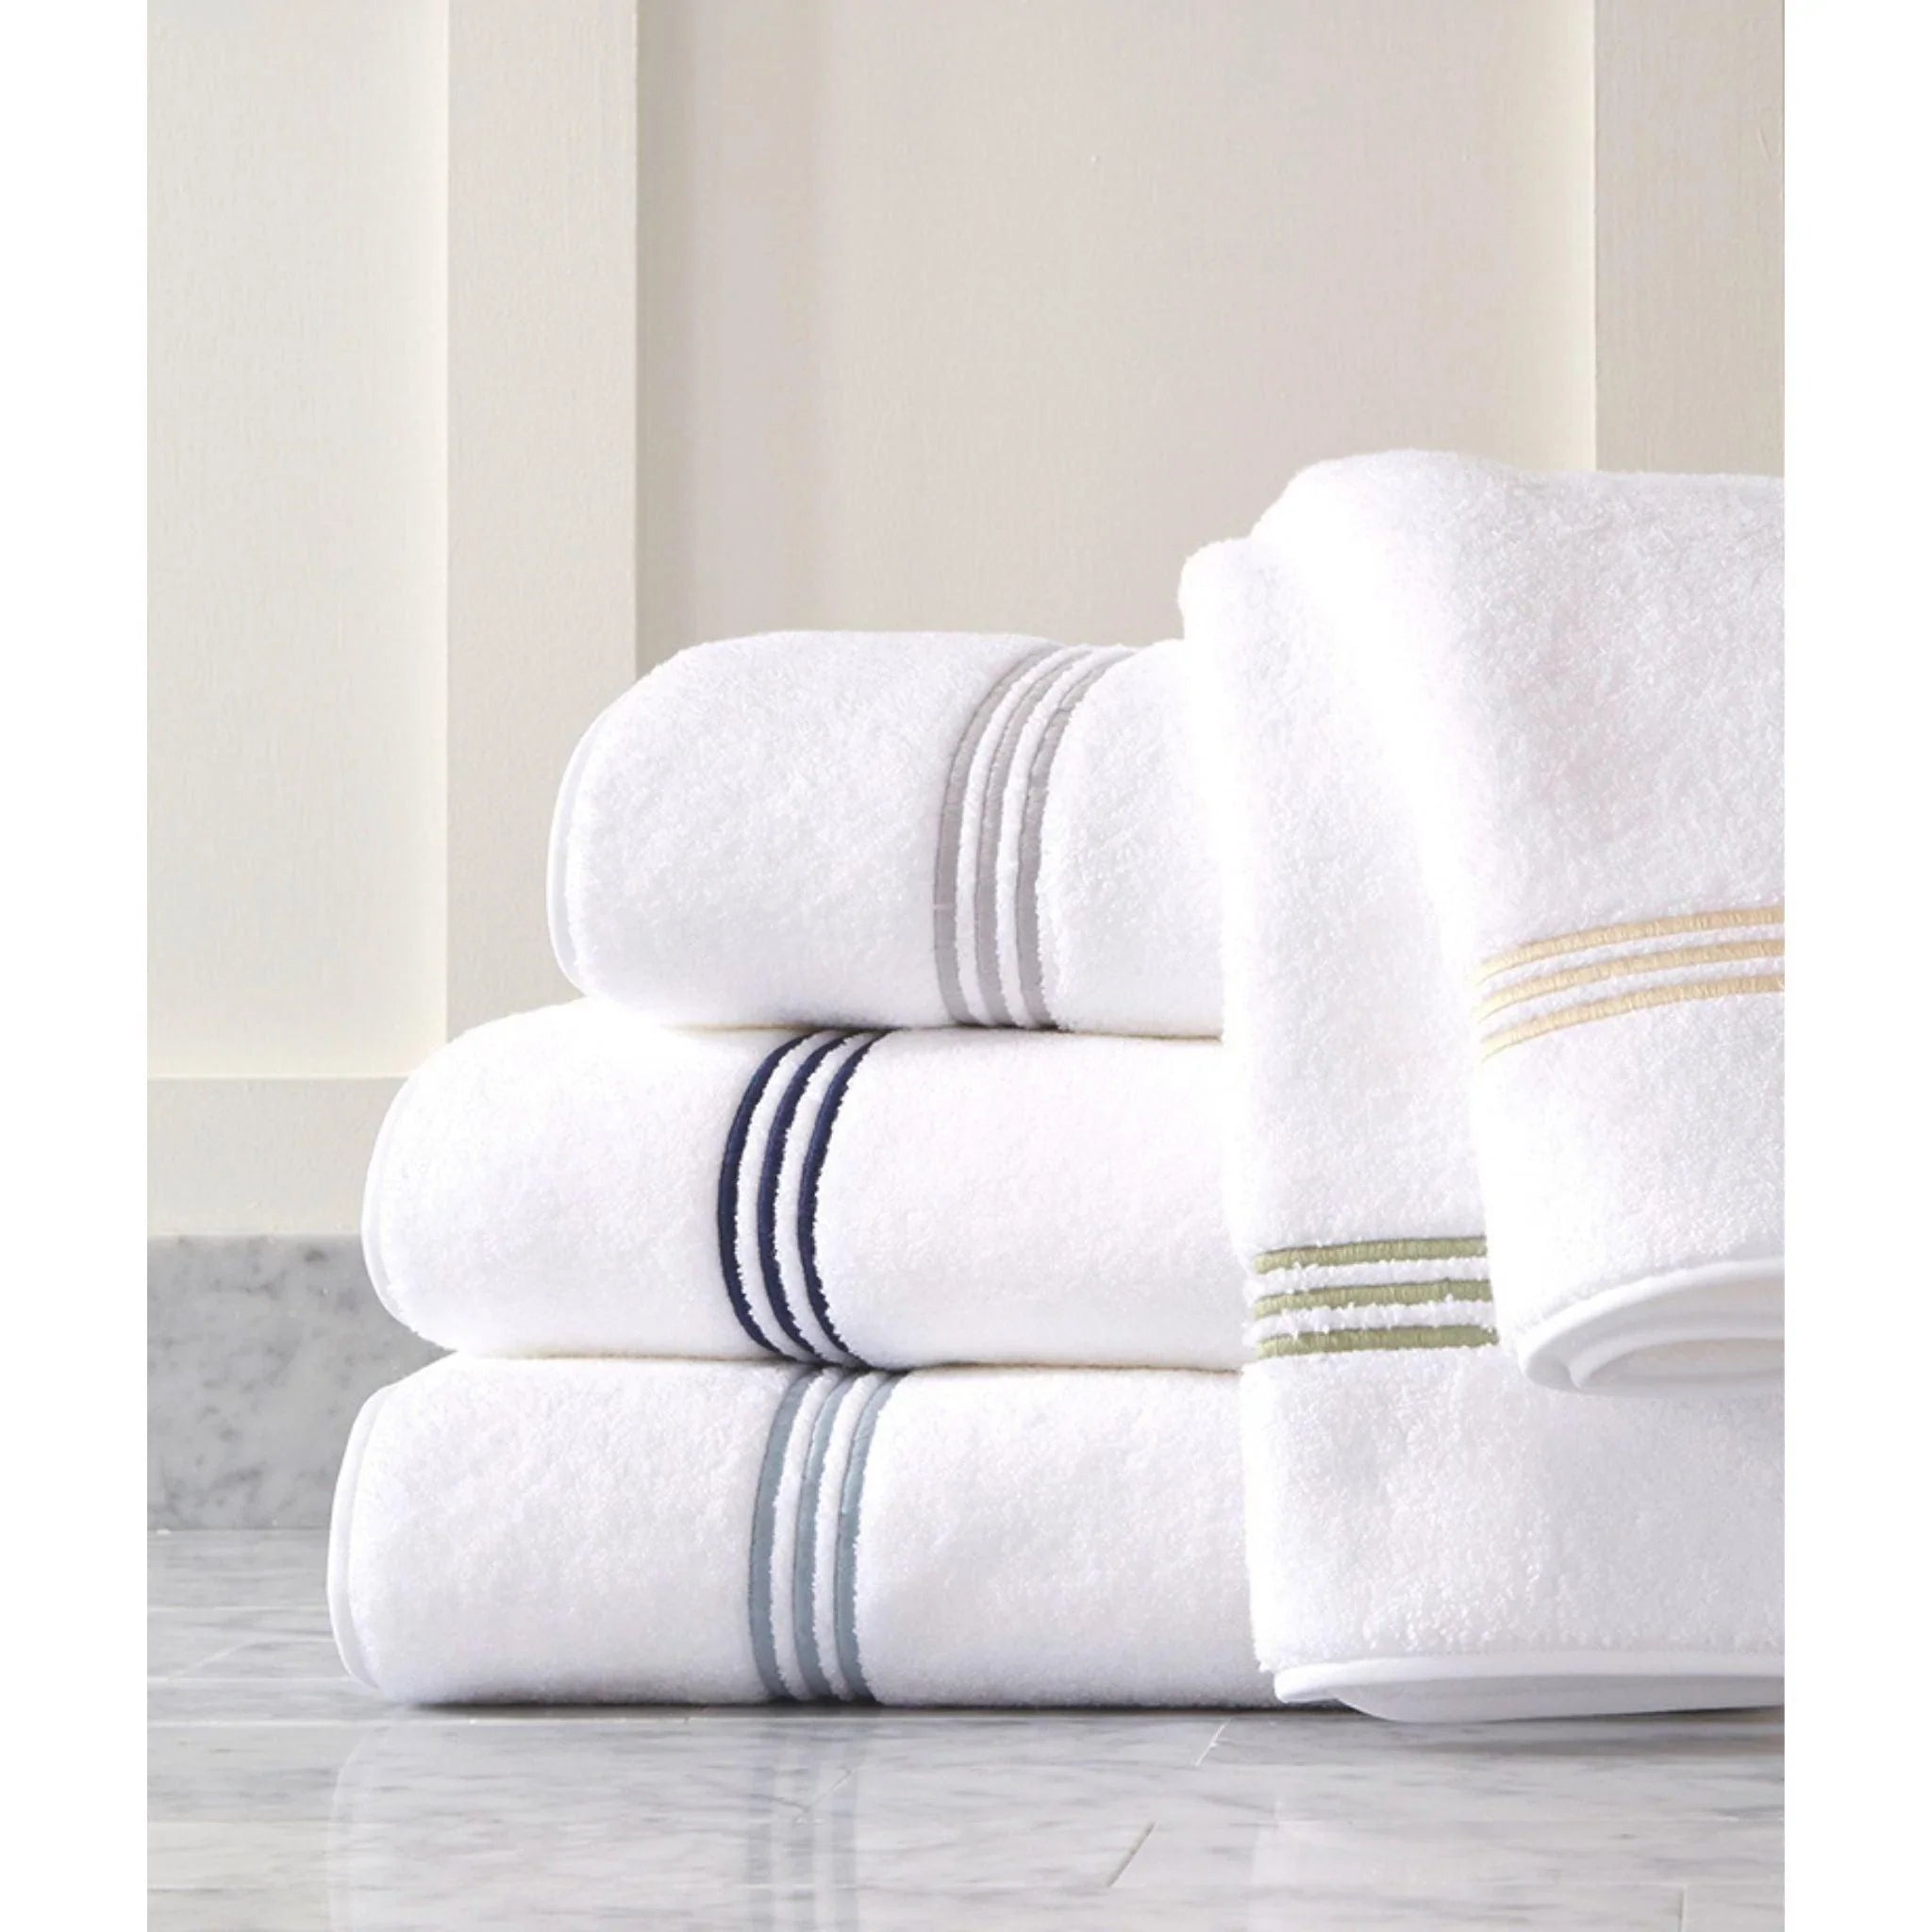 https://www.wellappointedhouse.com/cdn/shop/files/trilogy-cotton-terry-bath-towels-bath-towels-the-well-appointed-house-2_0565bcbb-cb1c-4bef-9a85-e516116533b2.webp?v=1691688141